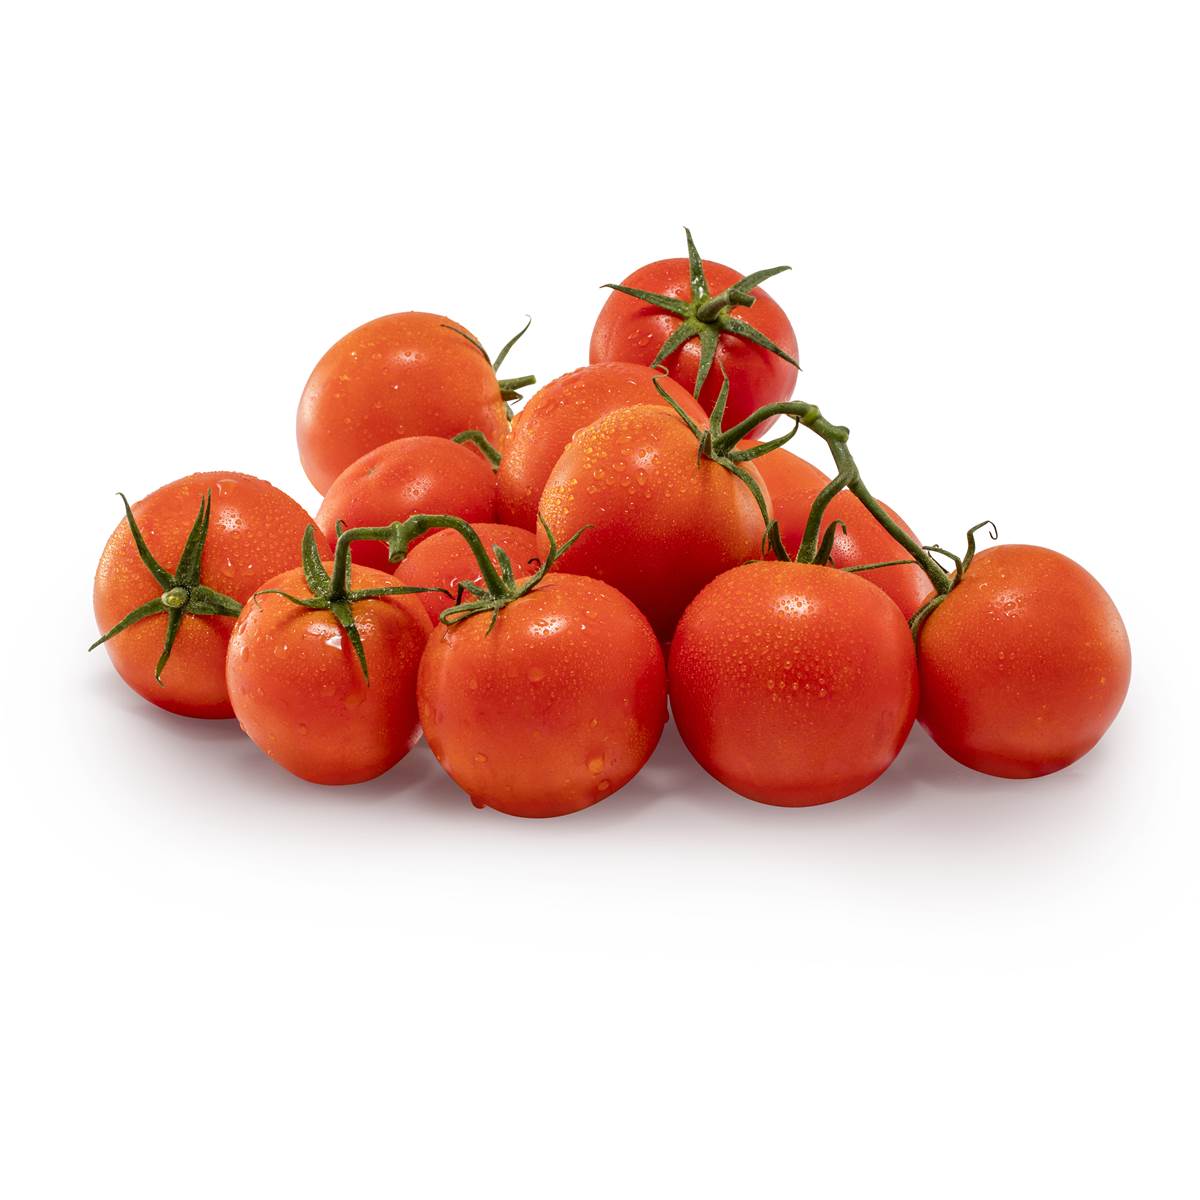 Calories in Truss Tomatoes